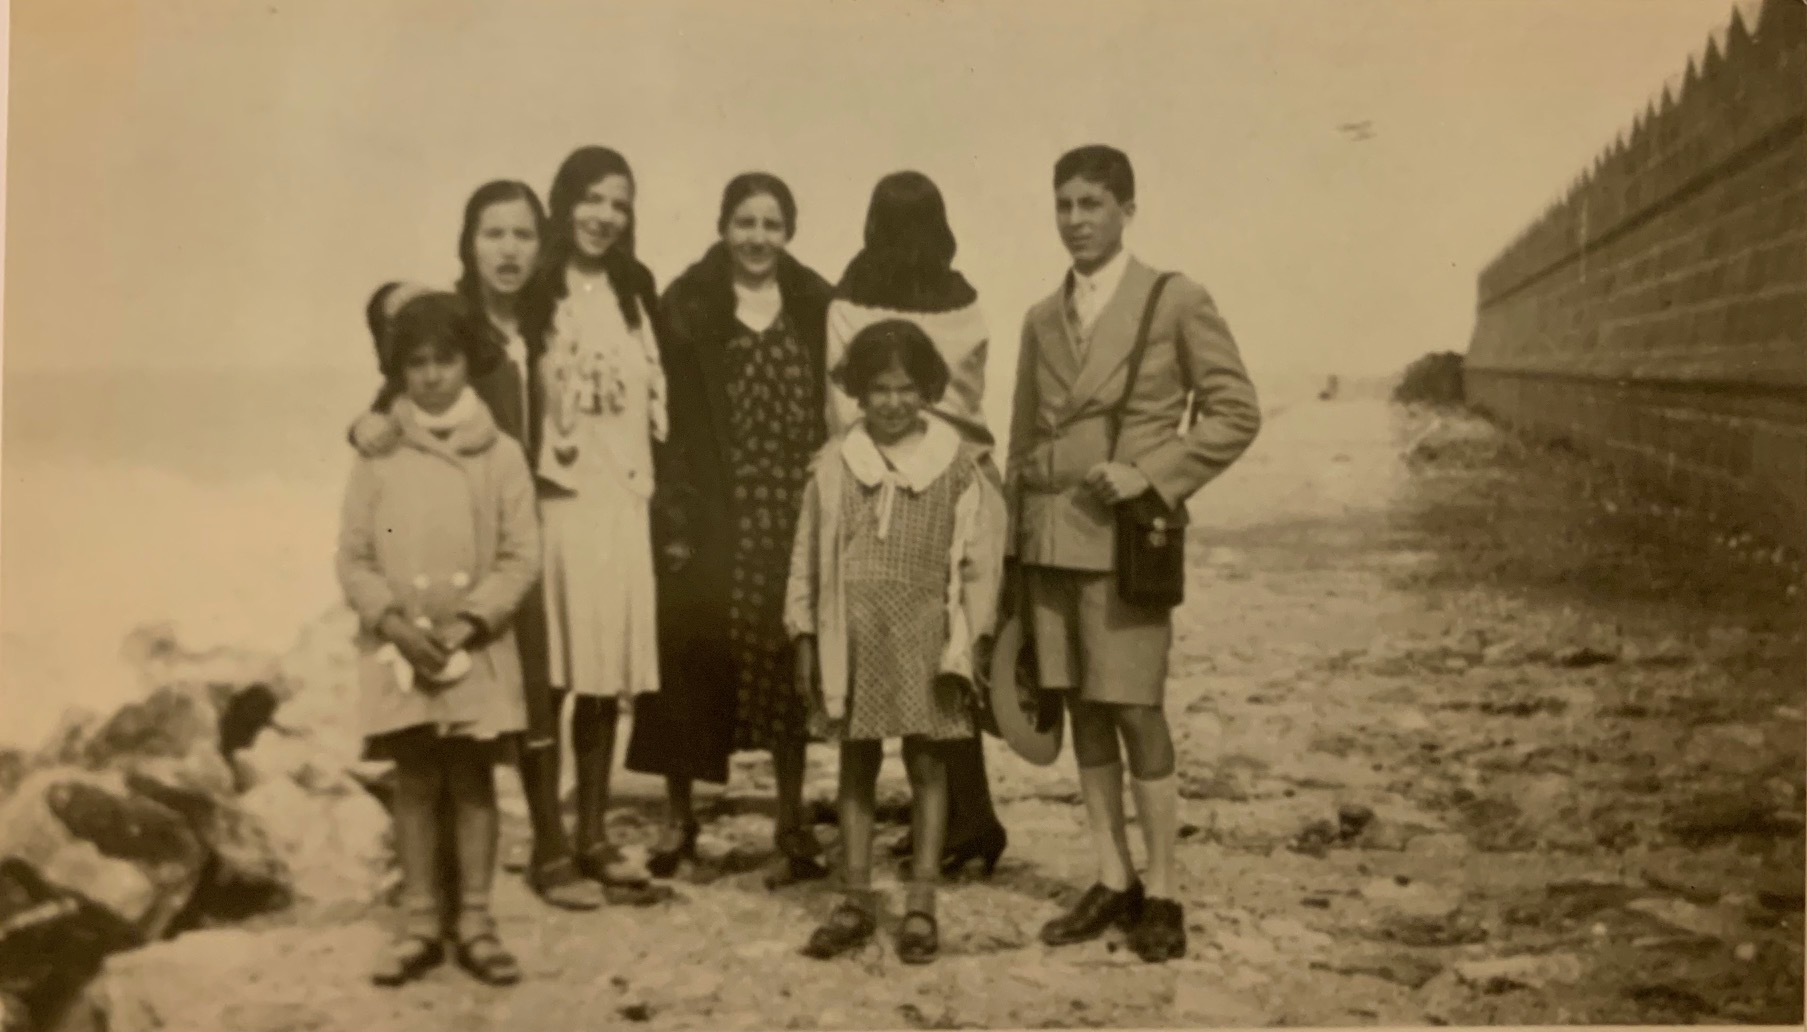 Stella Levi (front right, with her coat open) photographed with family and friends outside the city walls of Rhodes, c. 1928. (Courtesy of Stella Levi)